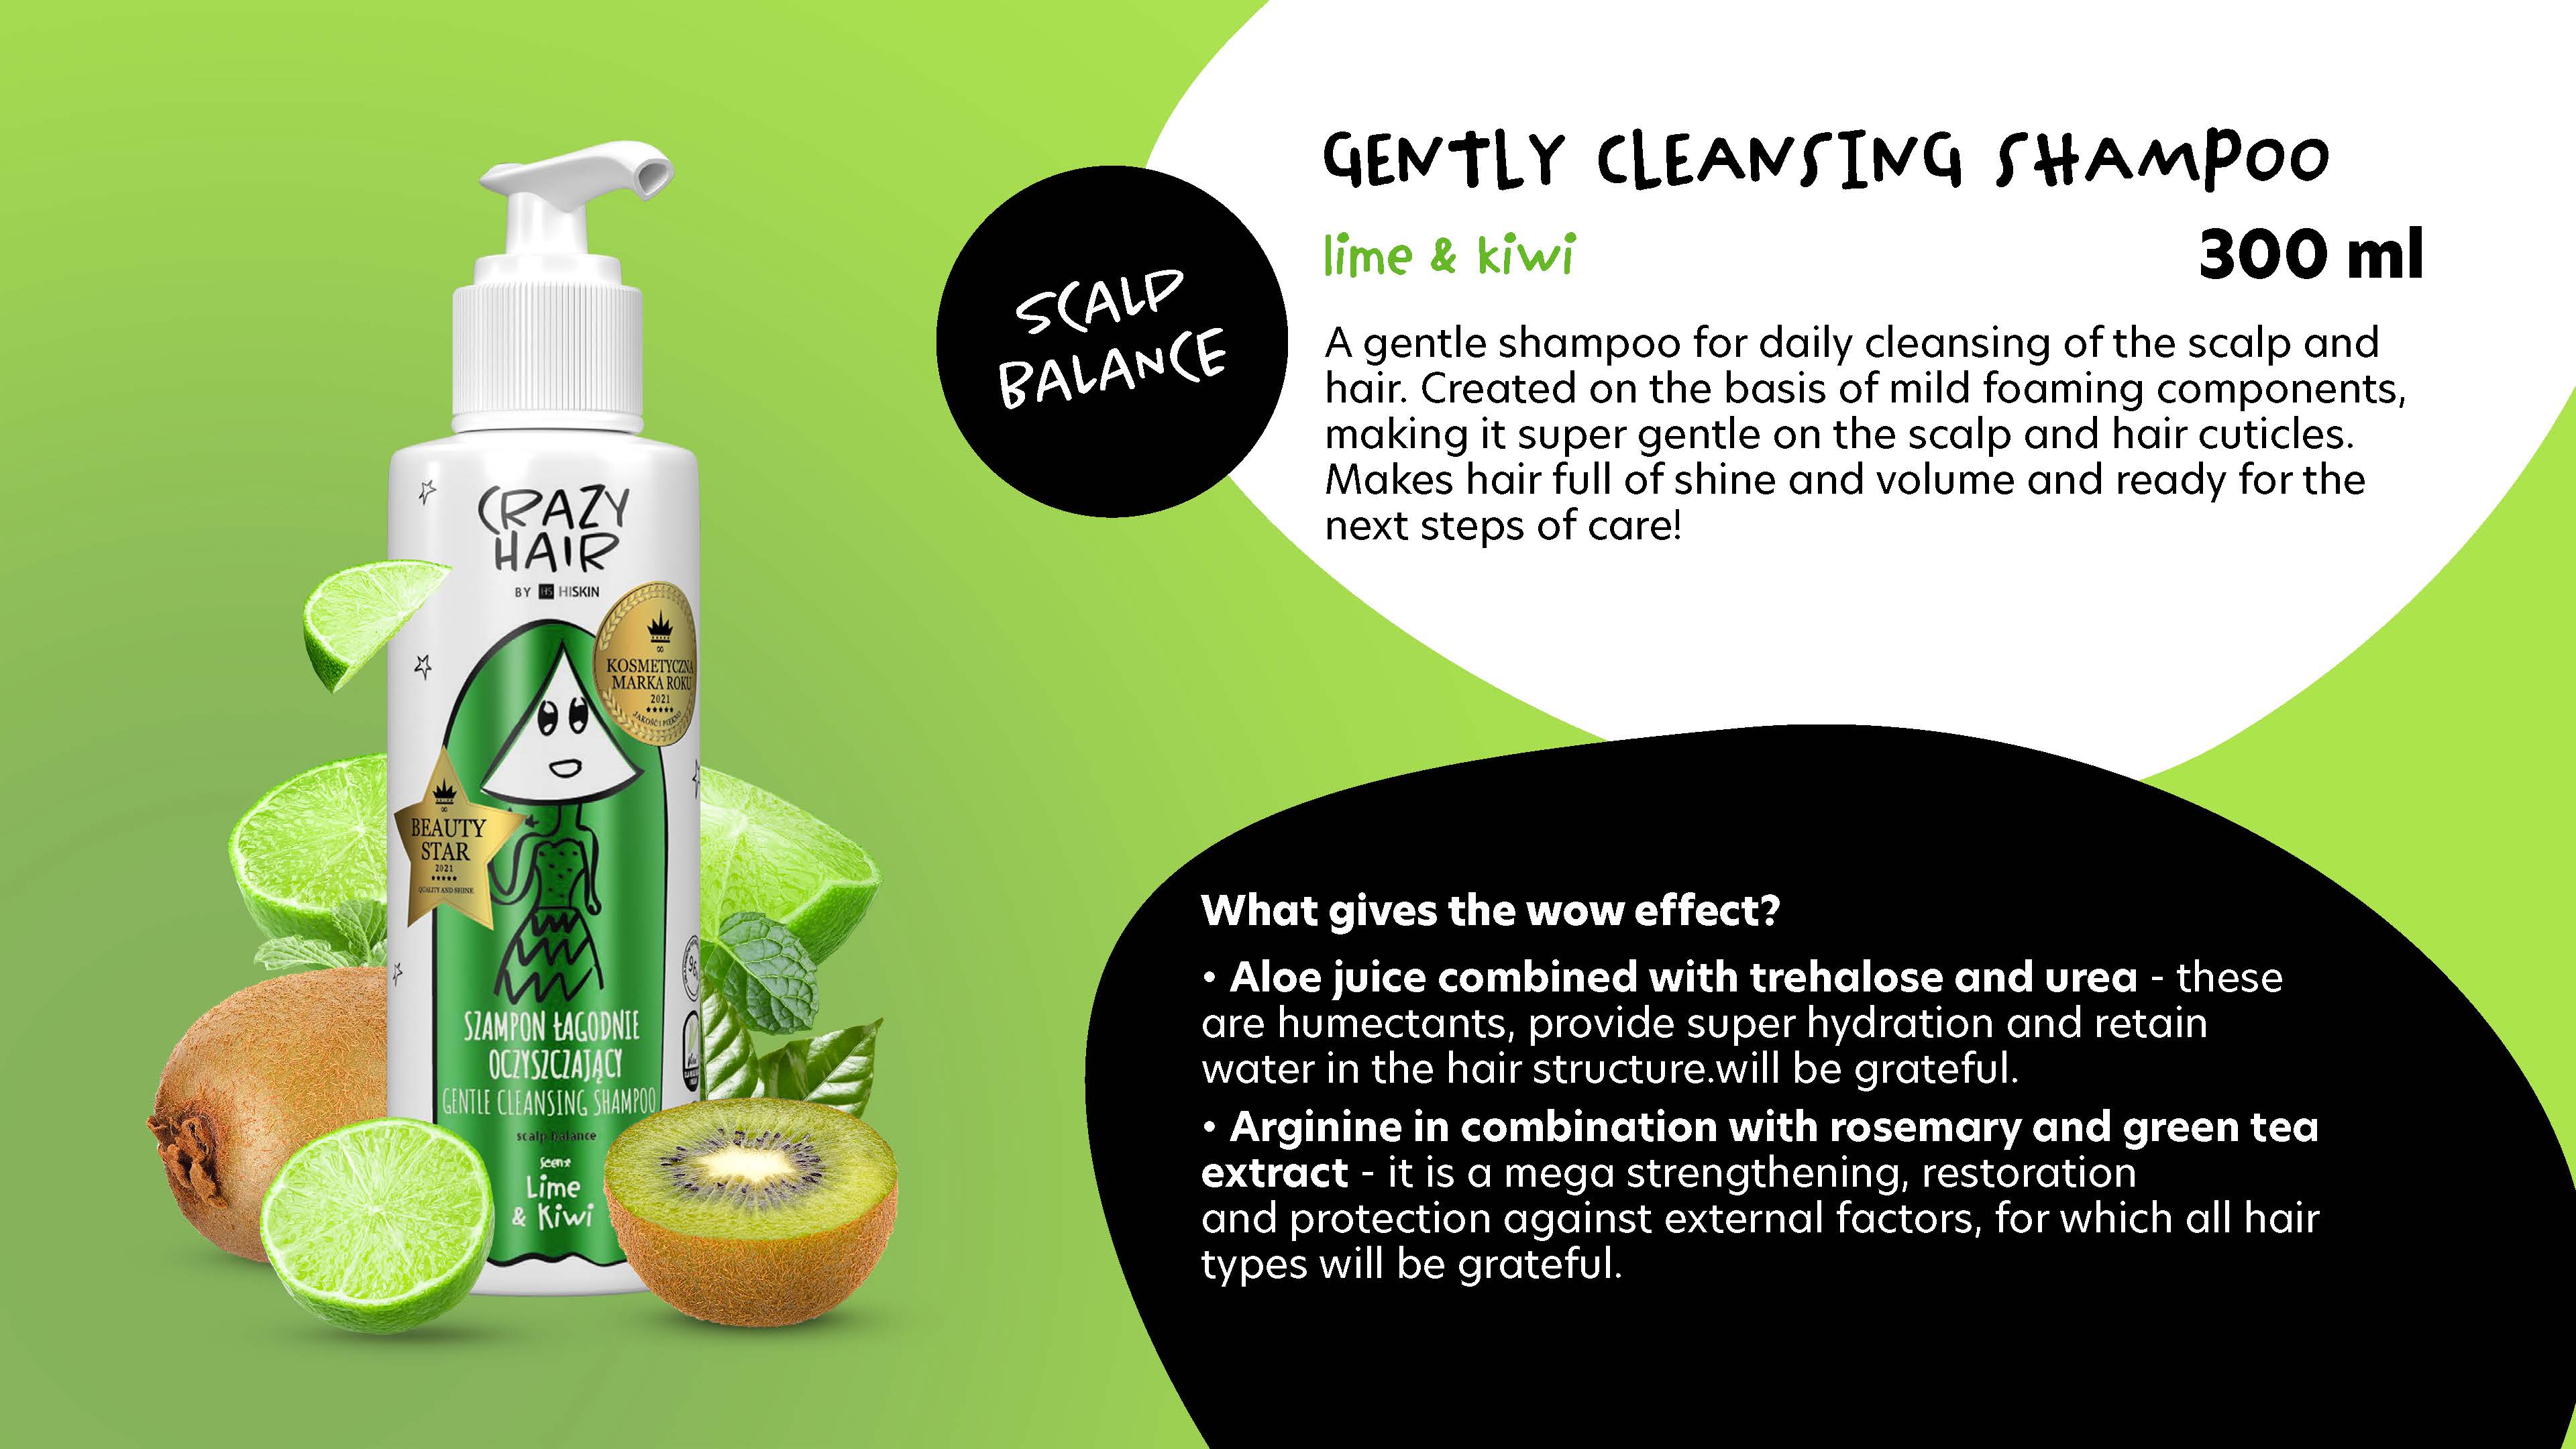 Crazy Hair Gently Cleansing Shampoo Scapl "Lime & Kiwi" – Alphets.ae